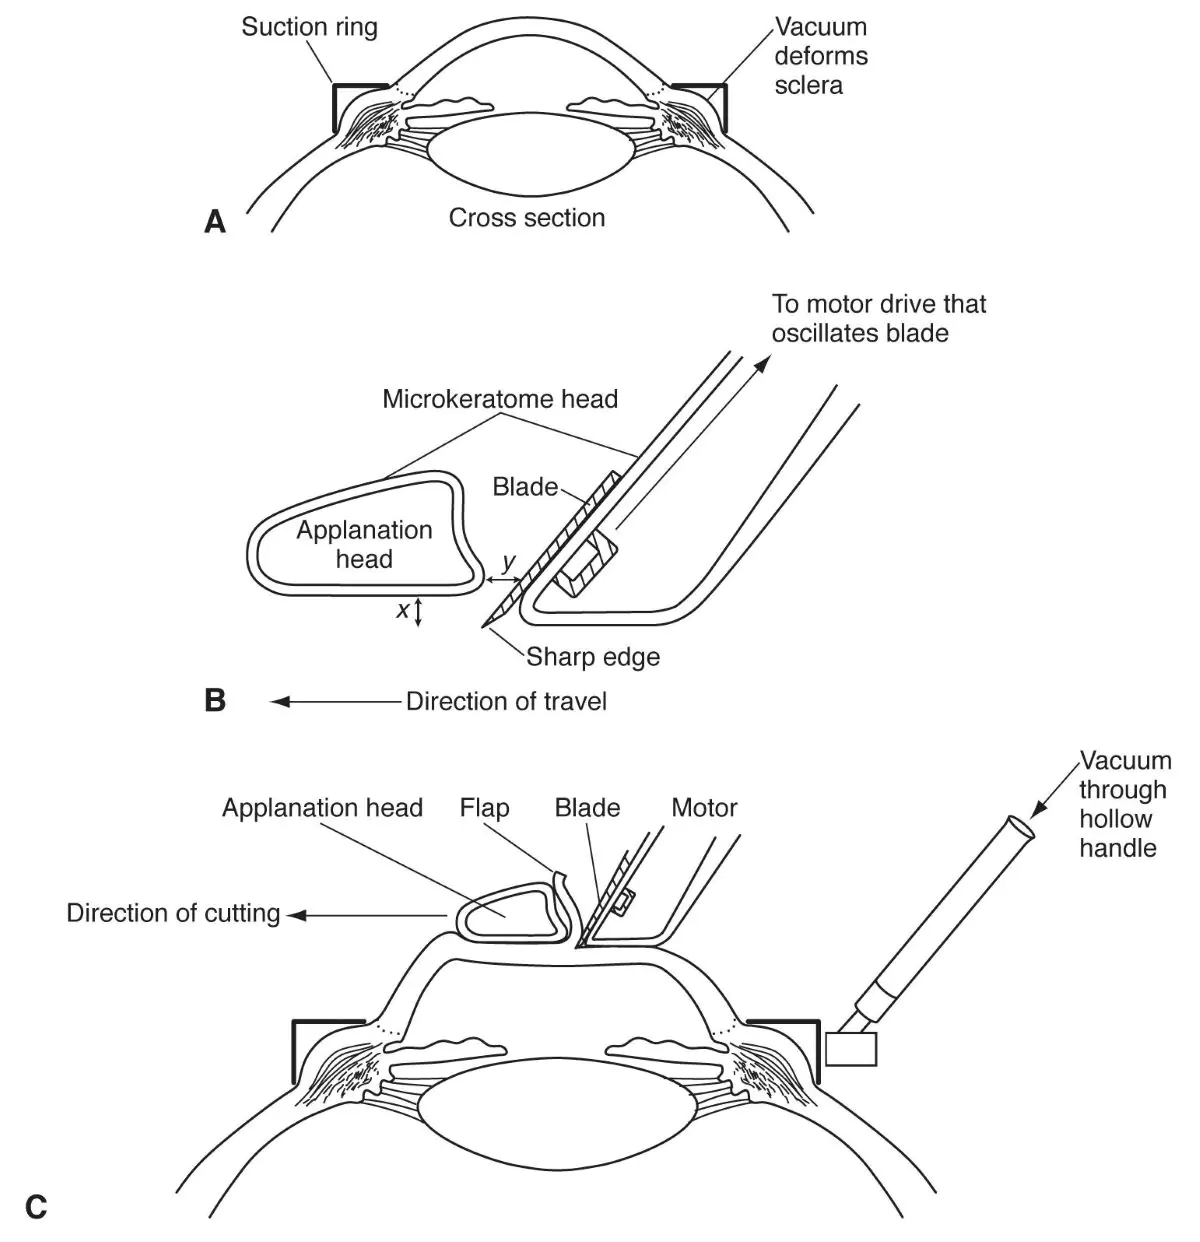 illustration of what microkeratome does